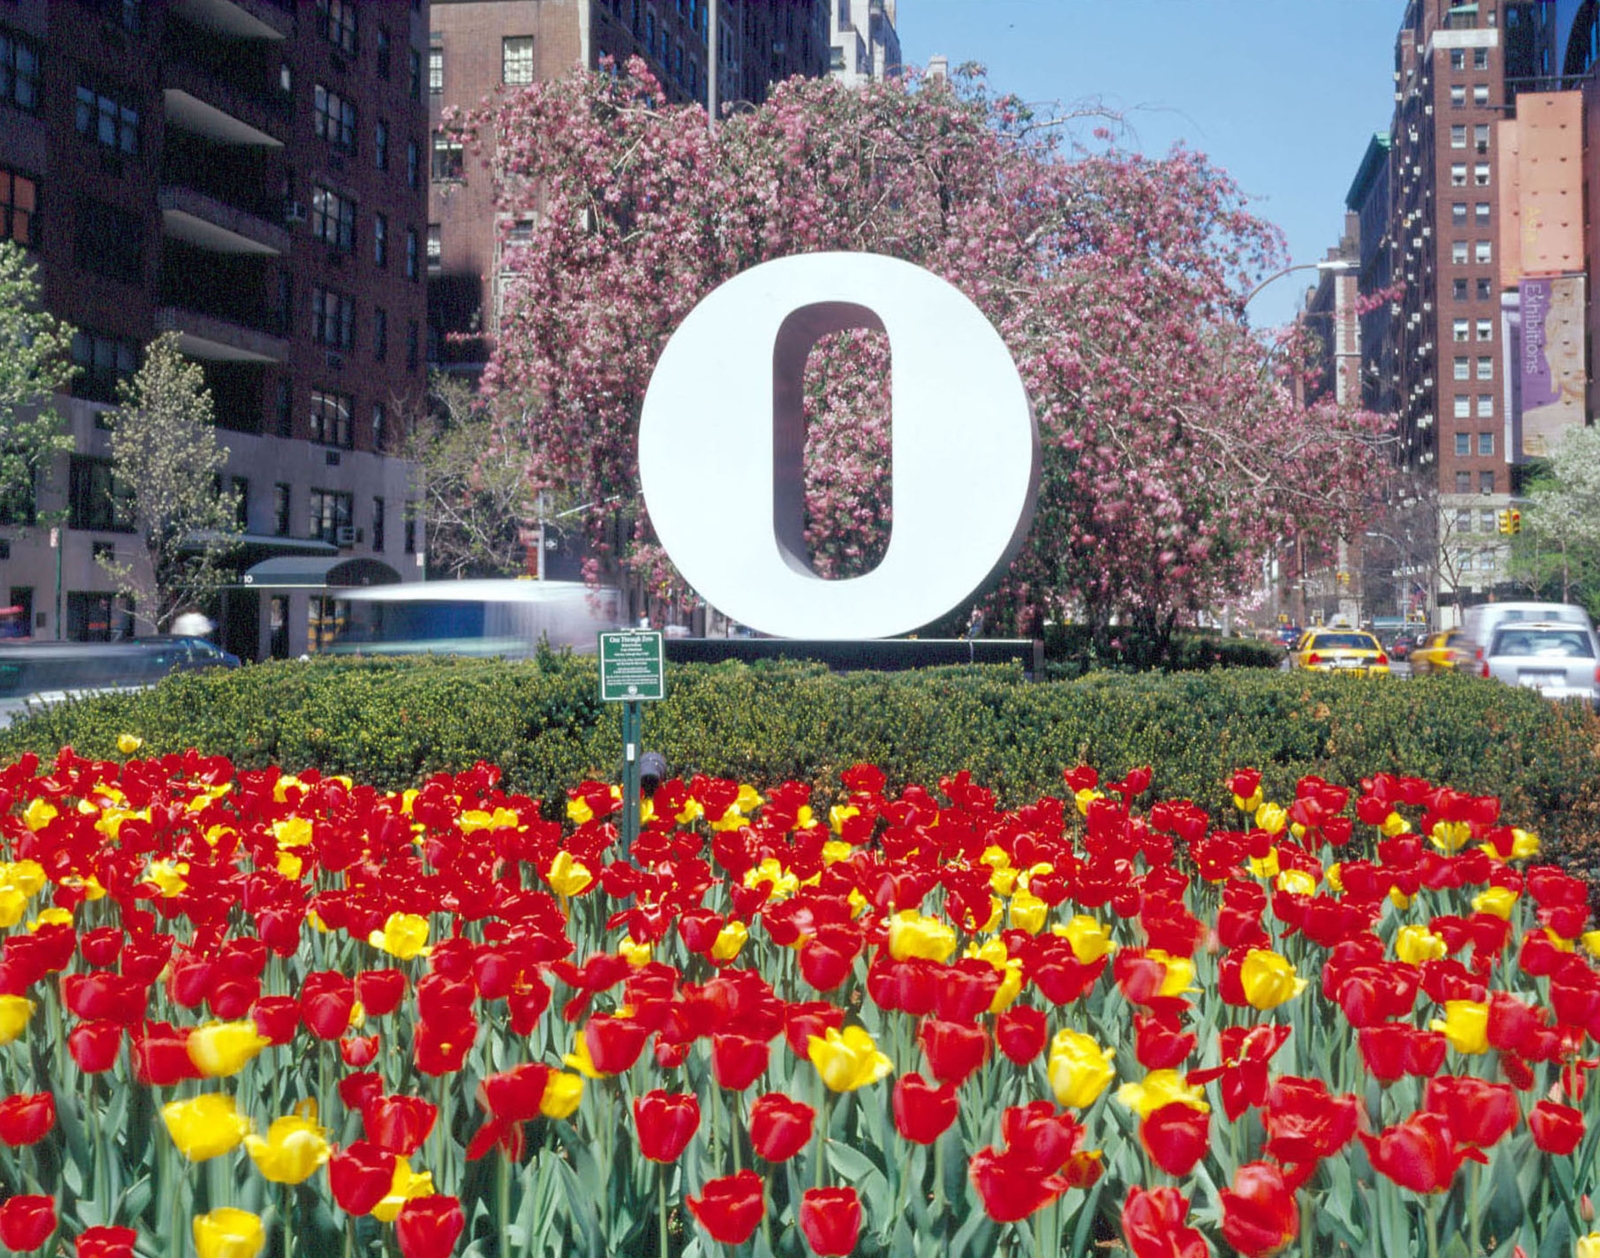 Indiana&amp;rsquo;s sculpture ZERO (1980) installed on the median at Park Avenue and Seventieth Street, New York, spring 2003